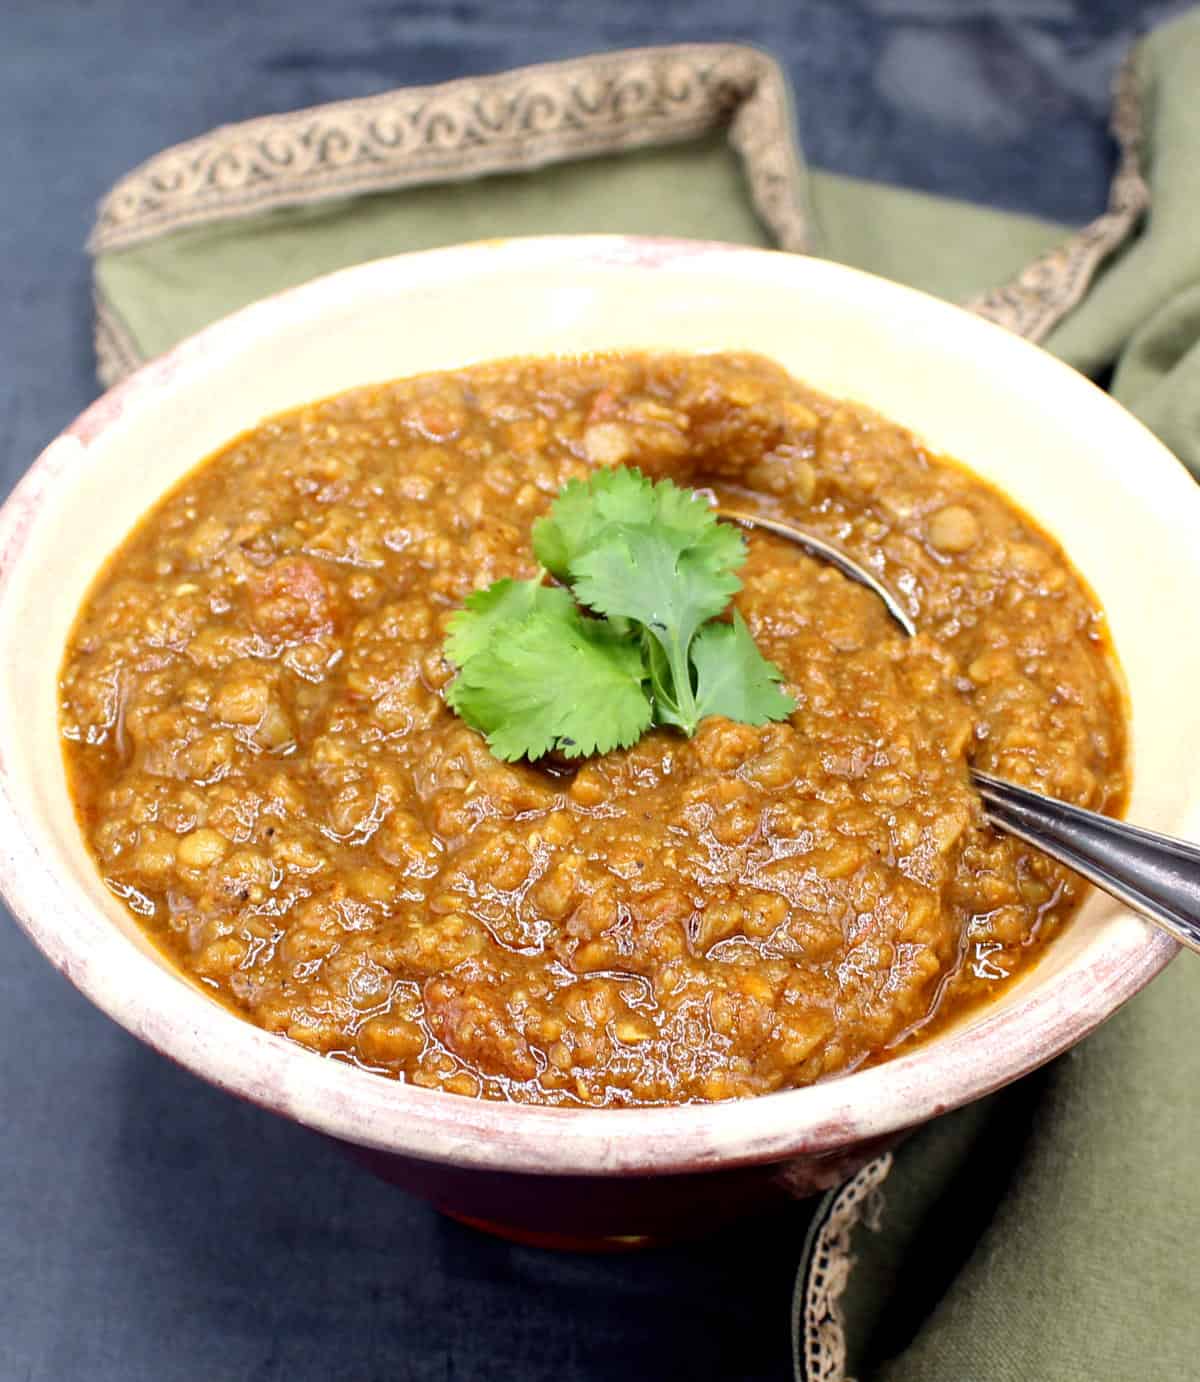 Ethiopian lentil stew in bowl with cilantro and spoon.